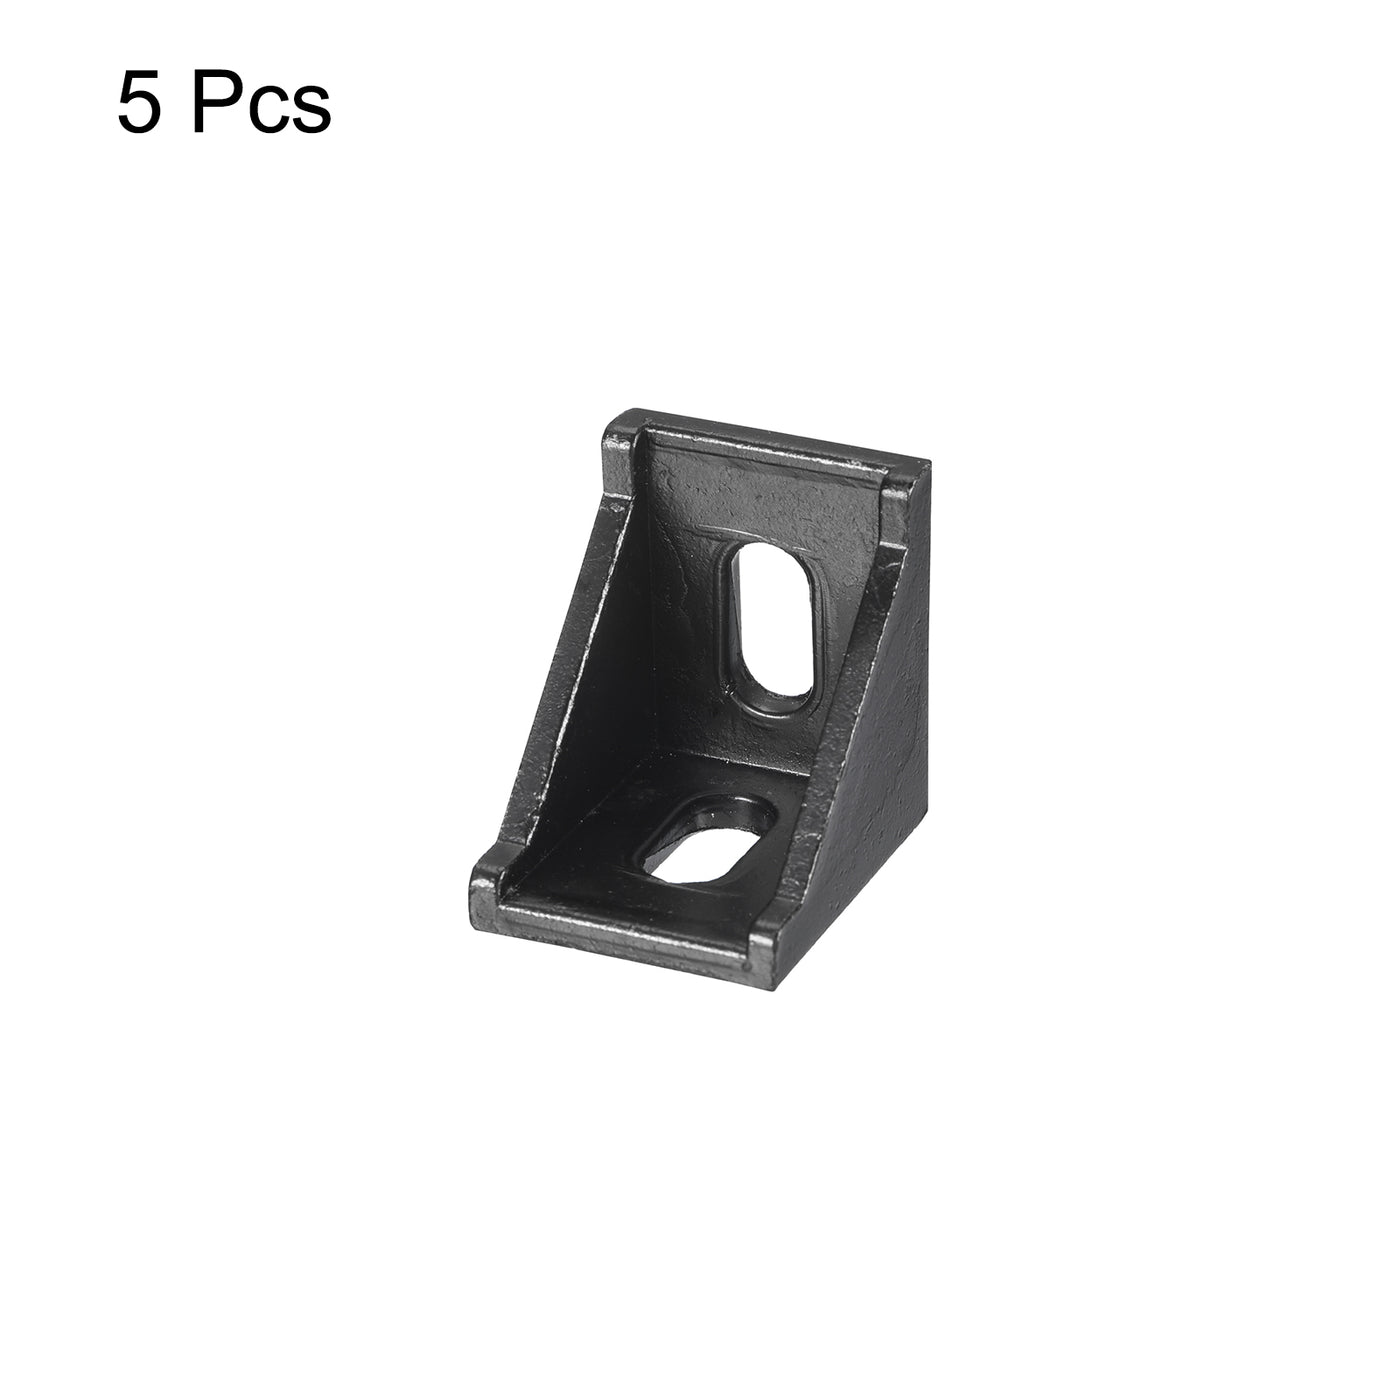 uxcell Uxcell 5Pcs Inside Corner Bracket Gusset, 35x35x29mm 3030 Angle Connectors for 3030 Series Aluminum Extrusion Profile Black